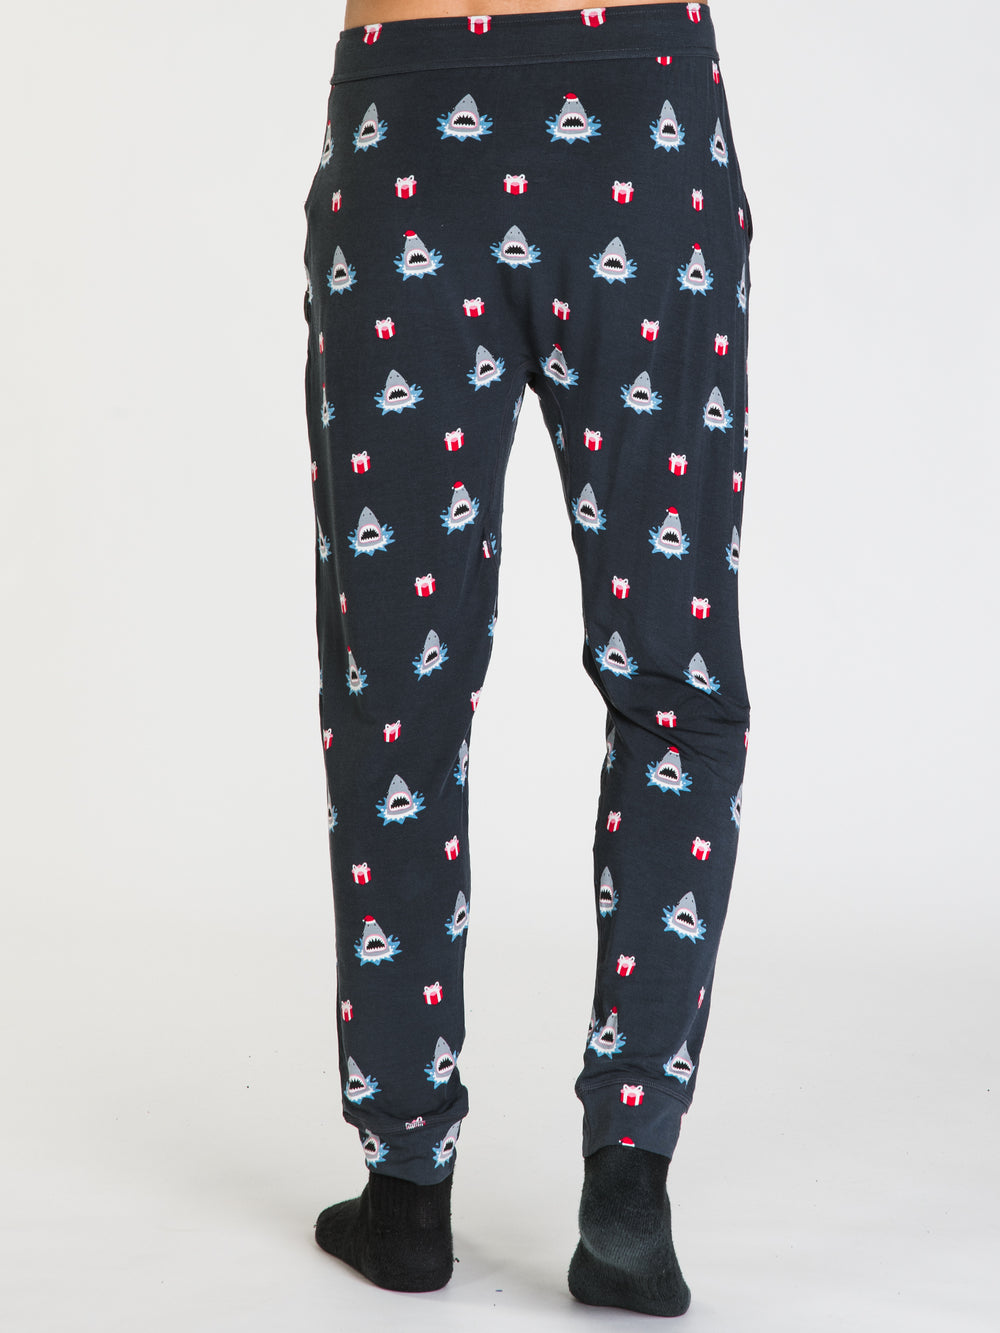 SAXX SNOOZE PANT - INK JINGLE JAWS - CLEARANCE